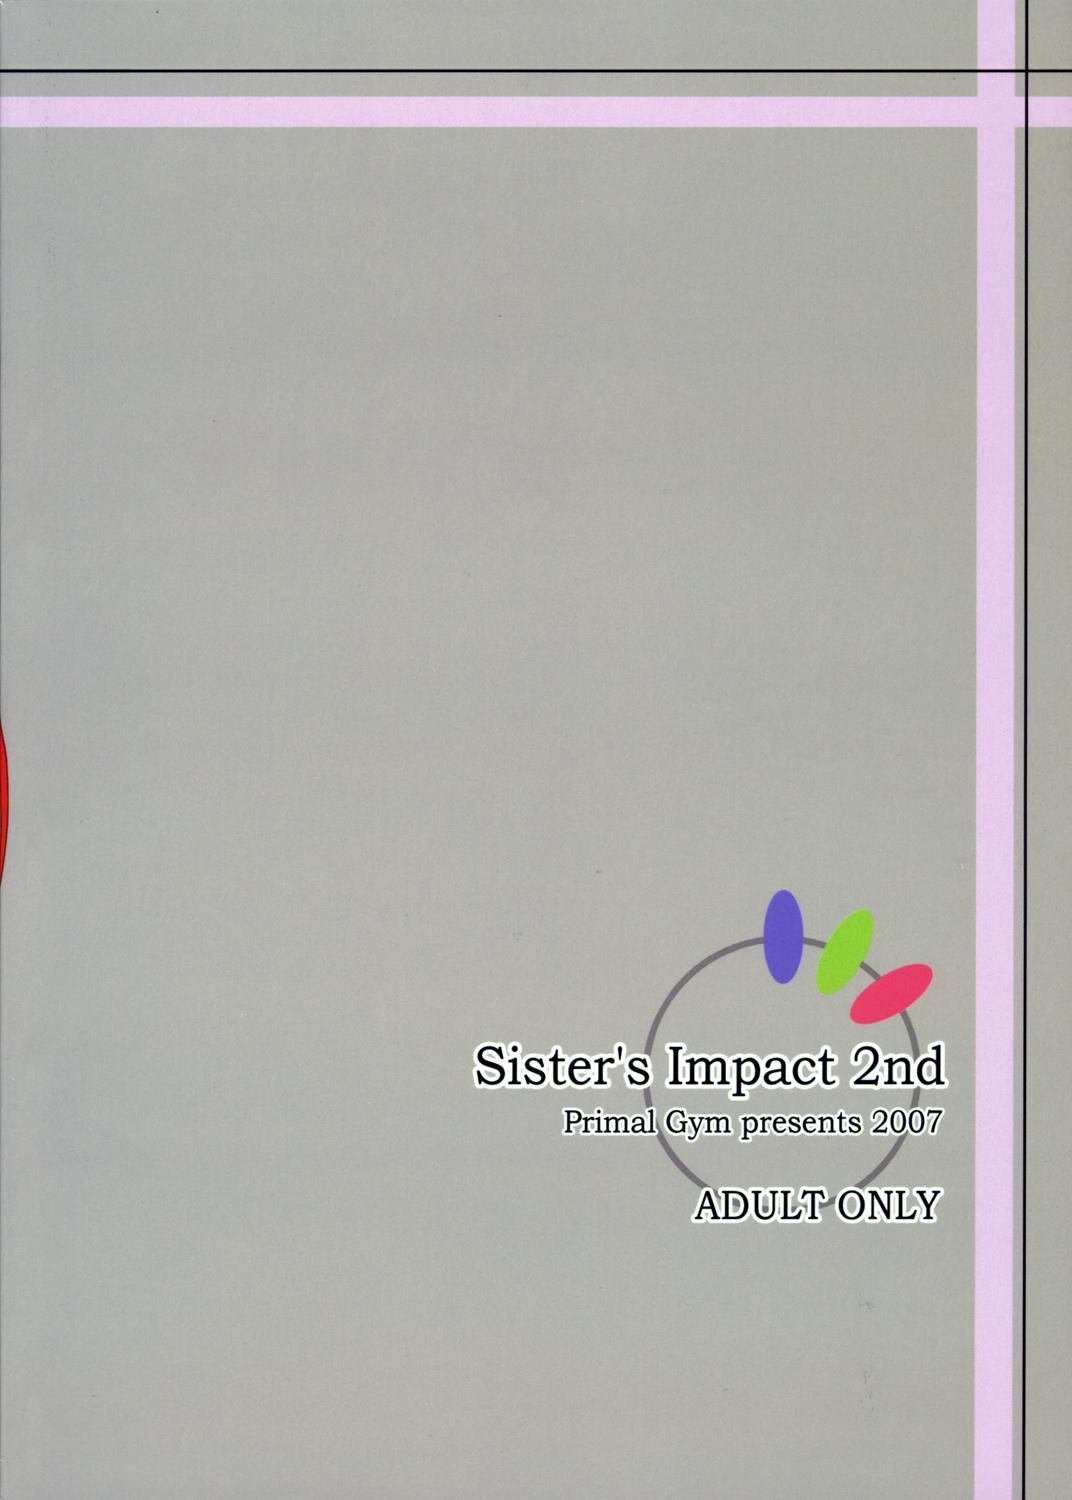 Sister's Impact 2nd 25